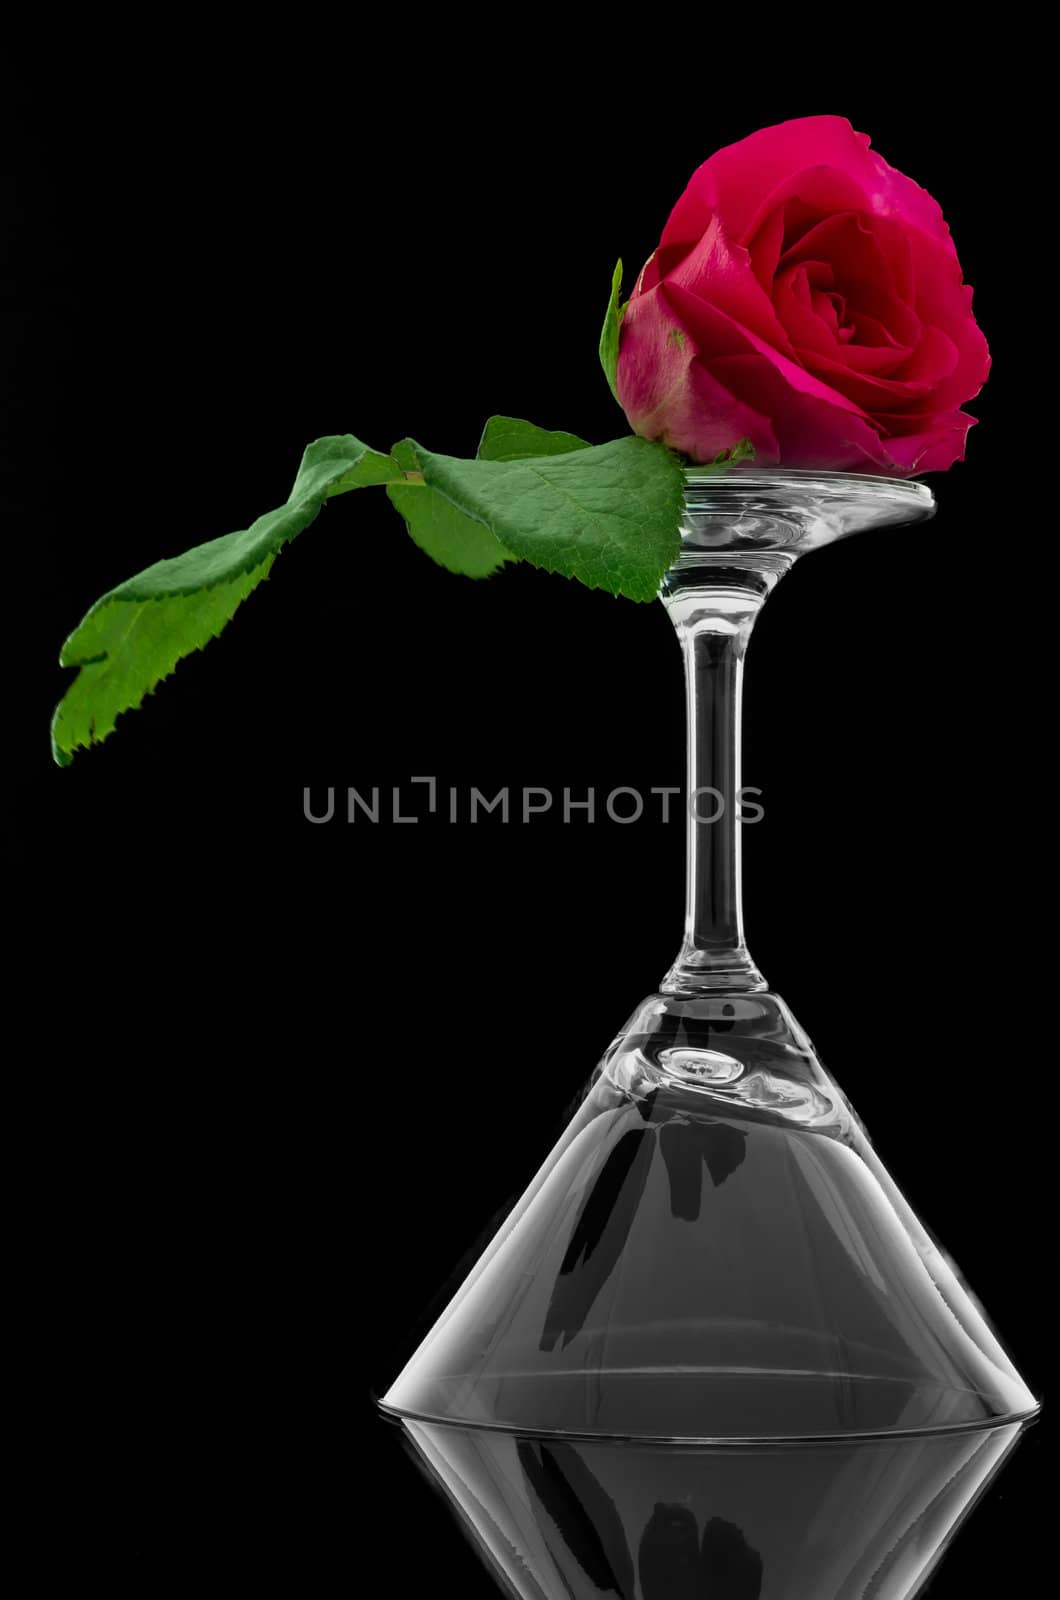 Rose on overturn empty cocktail glass on black background and reflect